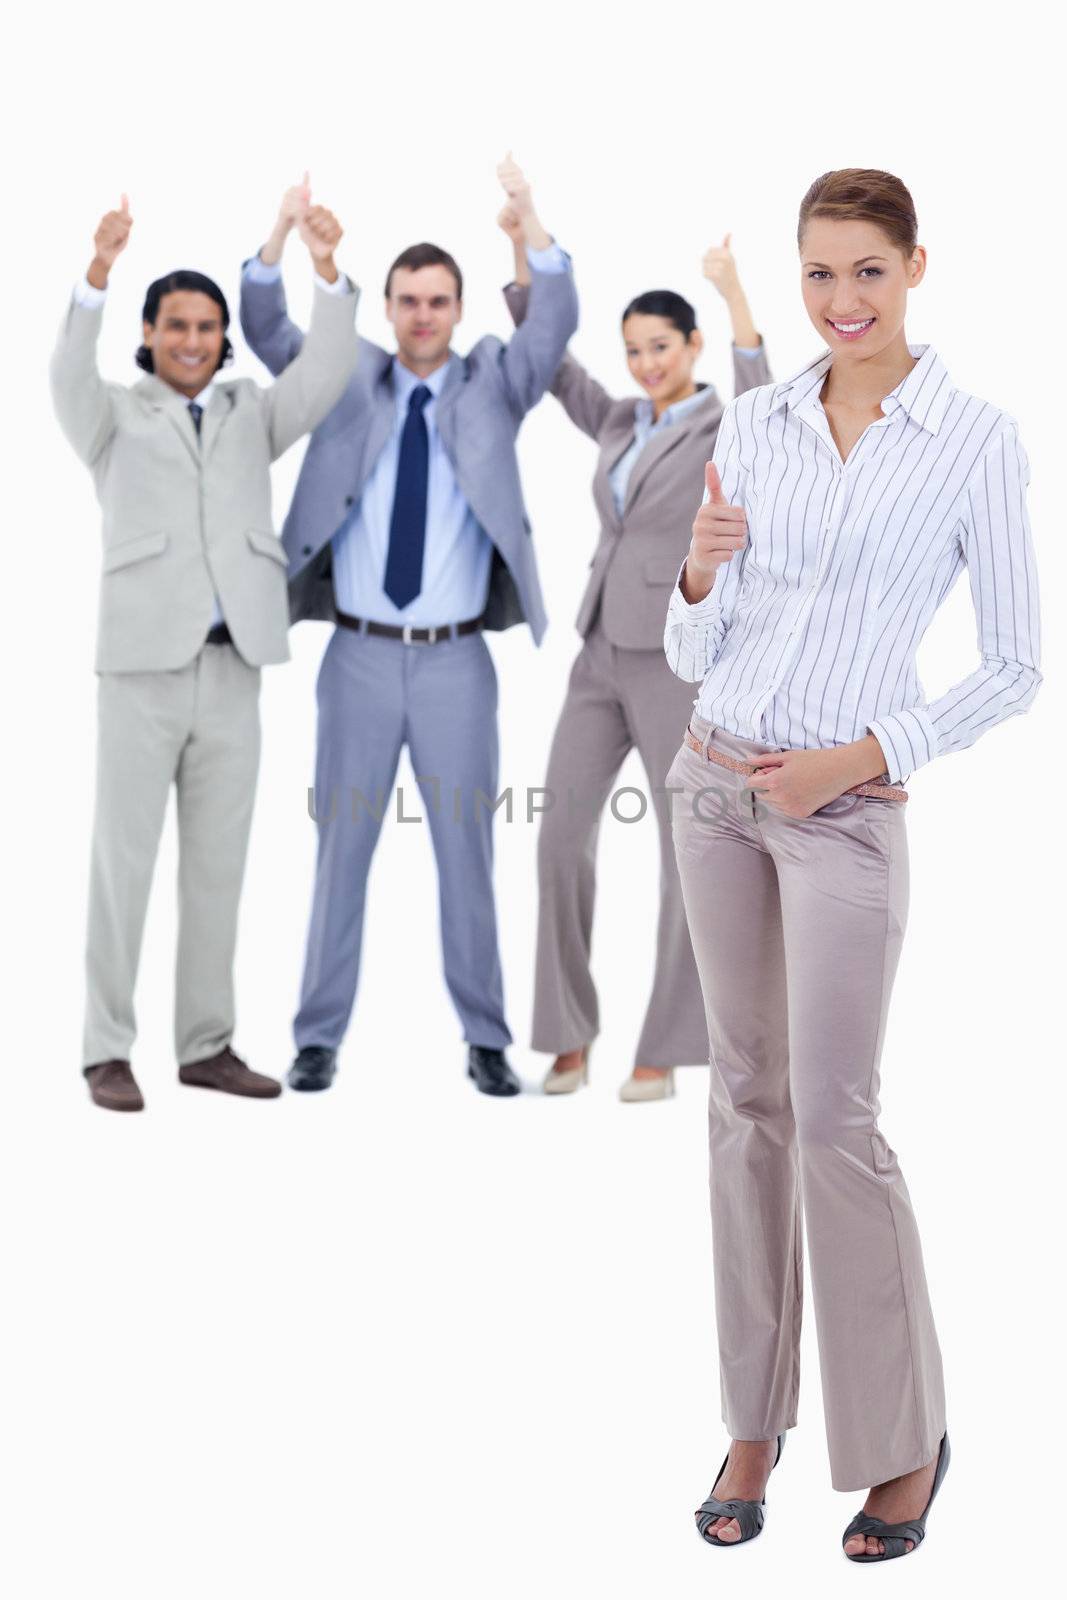 Secretary in foreground and business people with their thumbs up by Wavebreakmedia